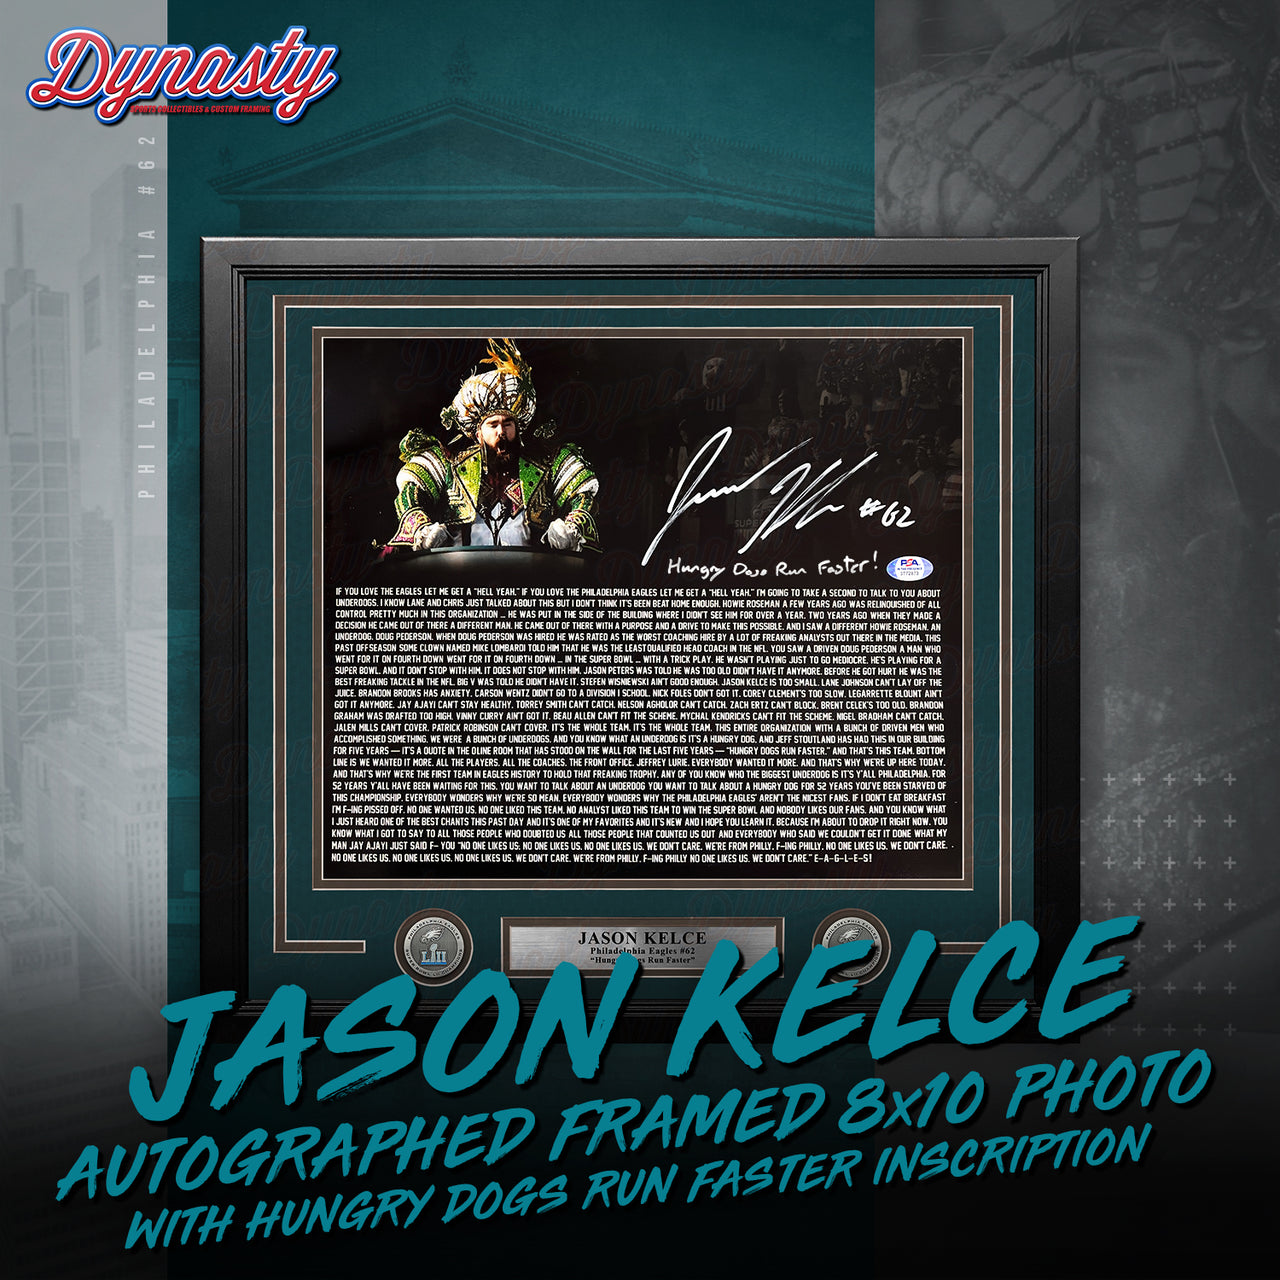 Jason Kelce Autographed Parade Speech Text Framed Photo | Pre-Sale Opportunity - Dynasty Sports & Framing 